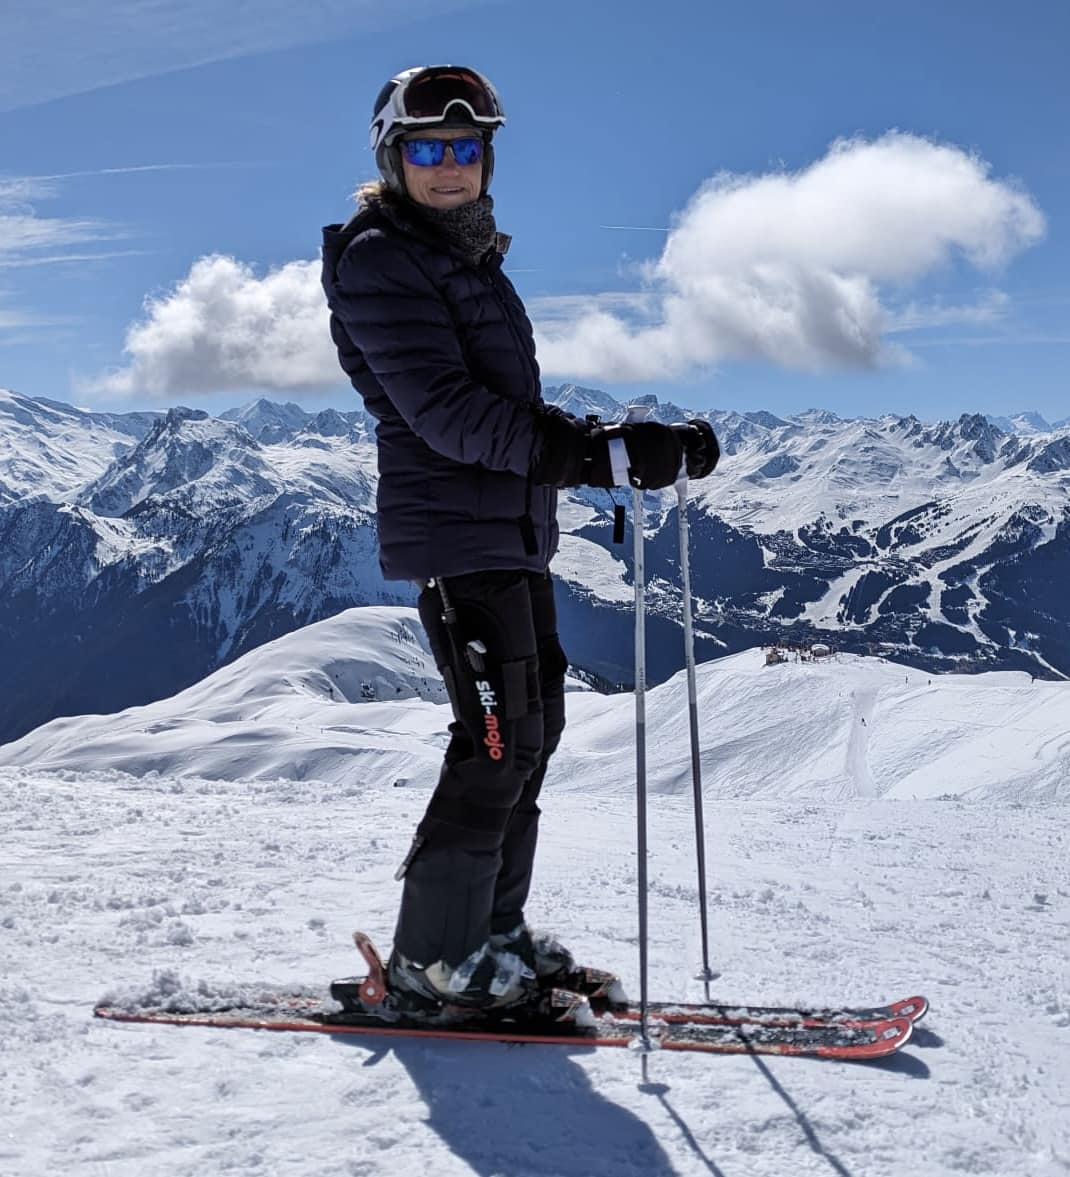 Judy Huffer recently contacted us after having suffered a painful meniscus tear: “I’ve just finished day three on my new Ski Mojo. I was skiing all day and very happy with no pain whilst skiing” ow.ly/kuys50R2VAR